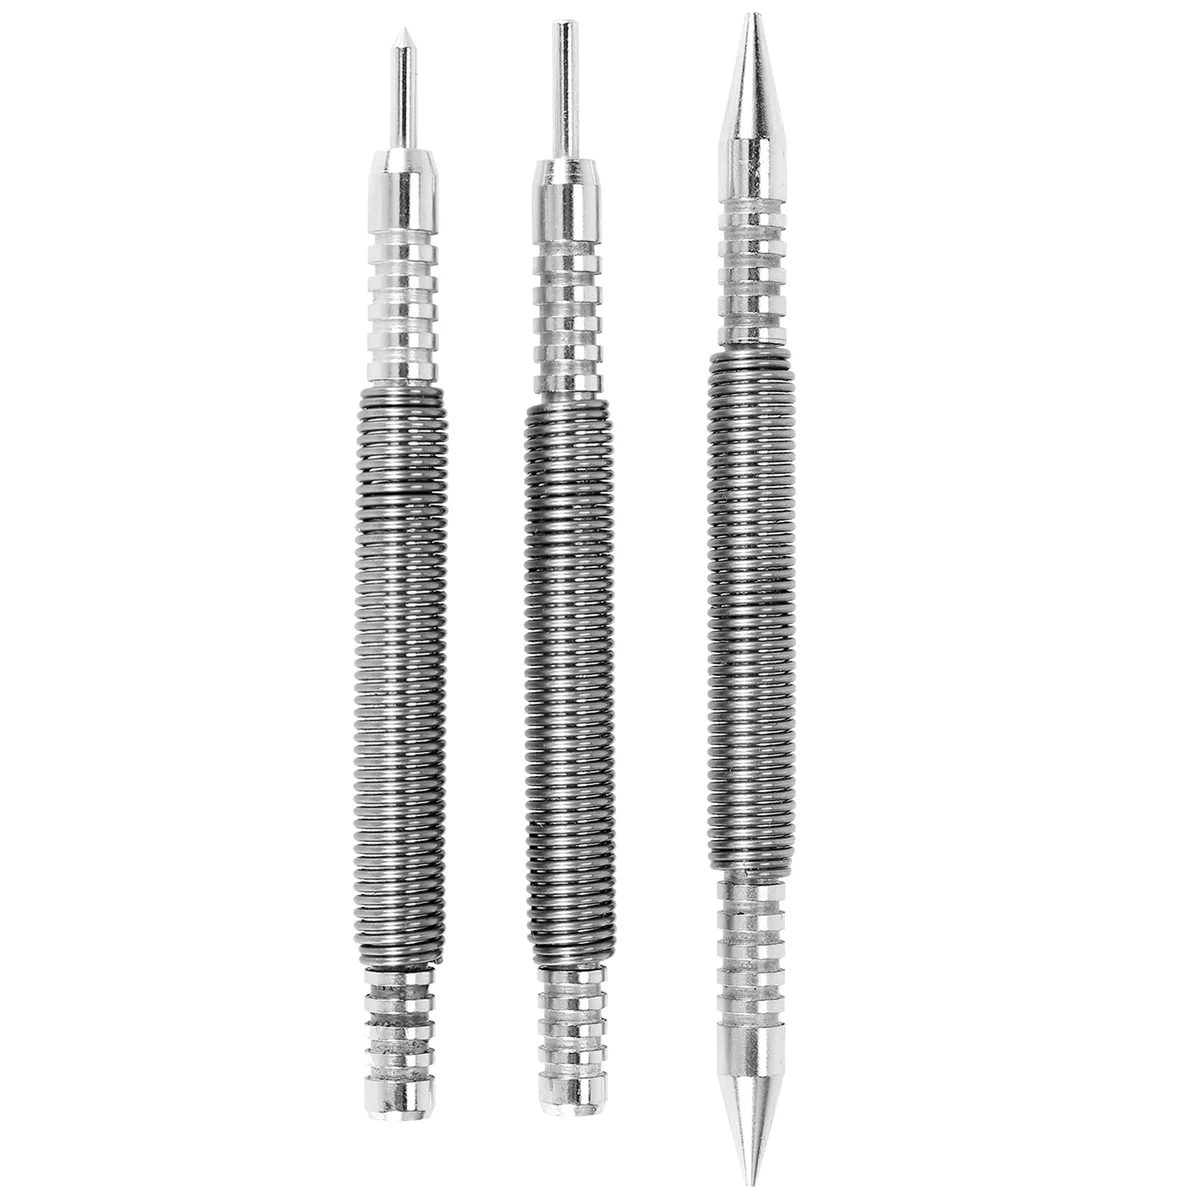 

3 Pcs Nail Set and Hinge Pin Tool Center Punch Spring Loaded Nail Set for Door 1/32 Inch 1/16 Inch Dual Head, 1/8 Inch